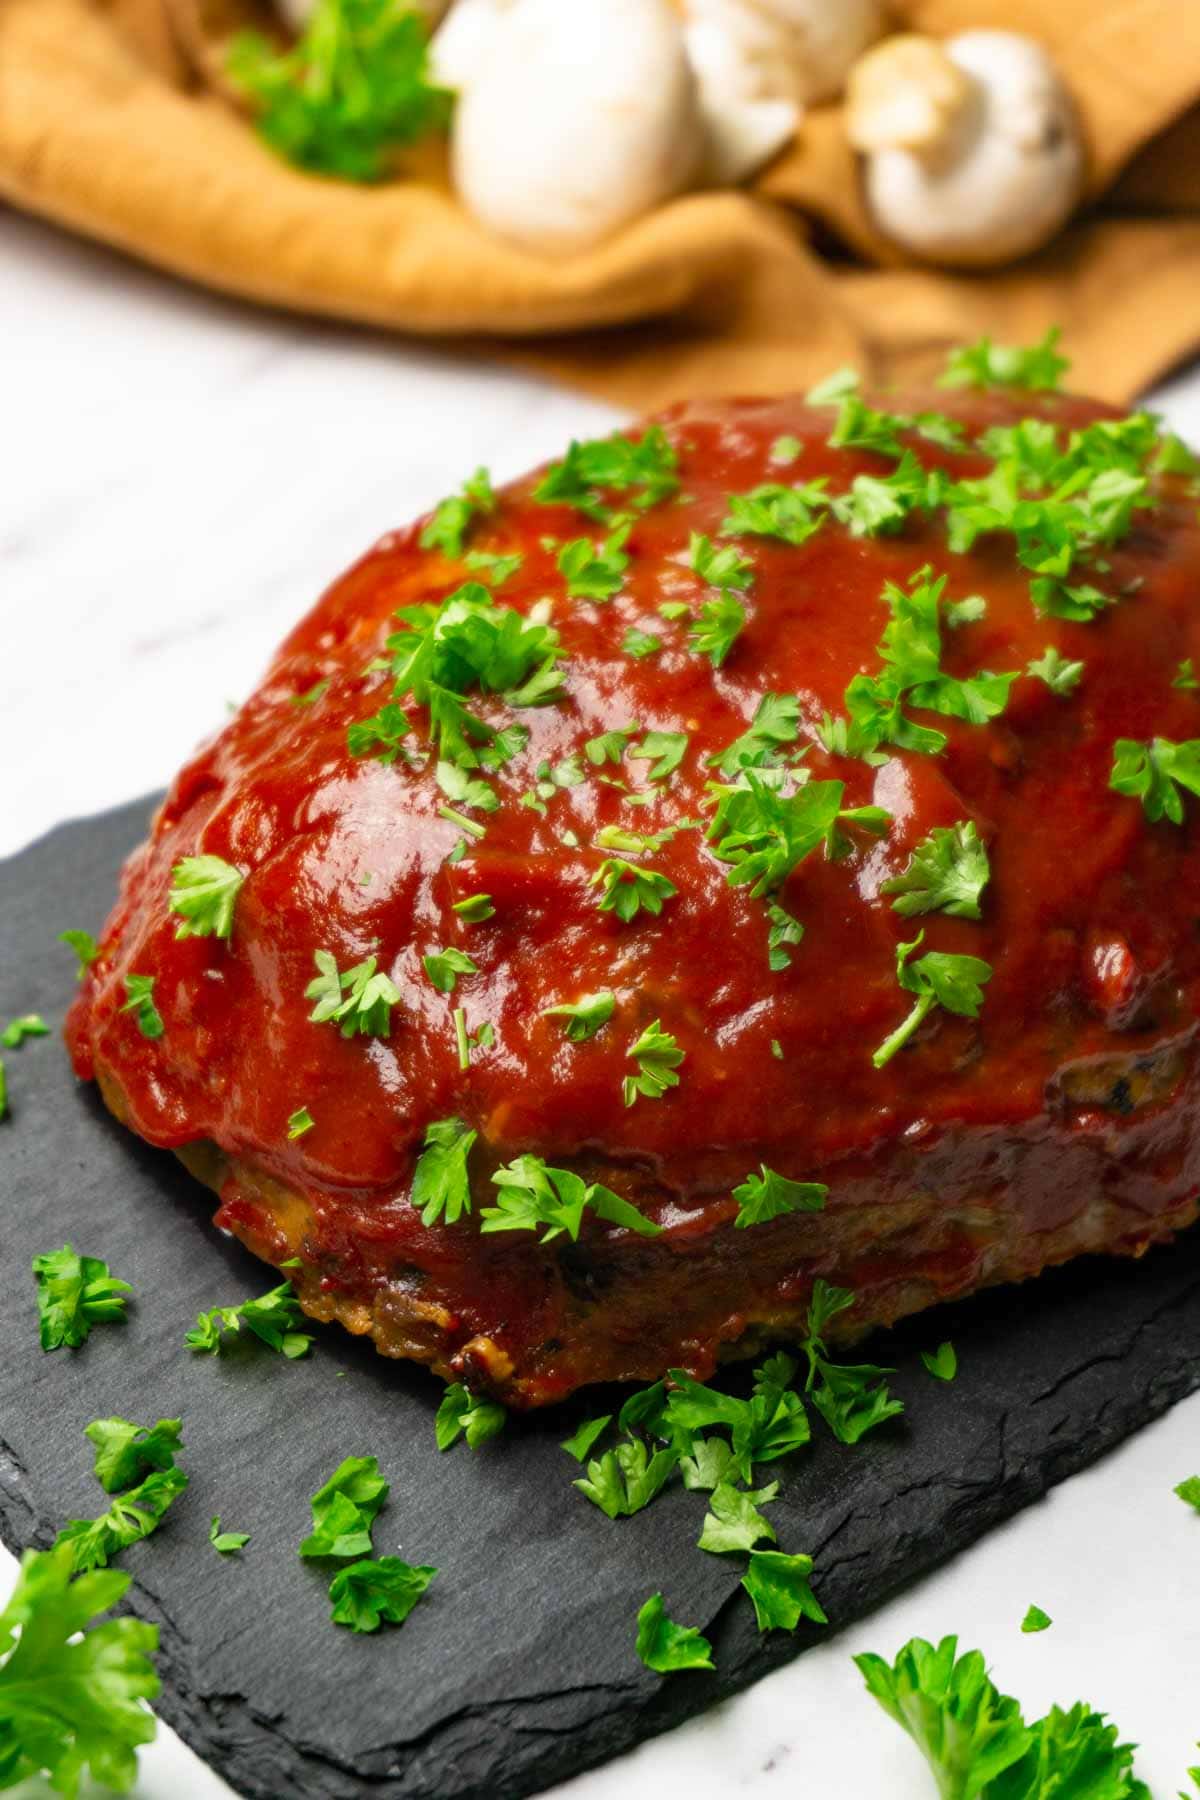 Turkey meatloaf with ketchup glaze garnished with fresh parsley served on a black stone board.